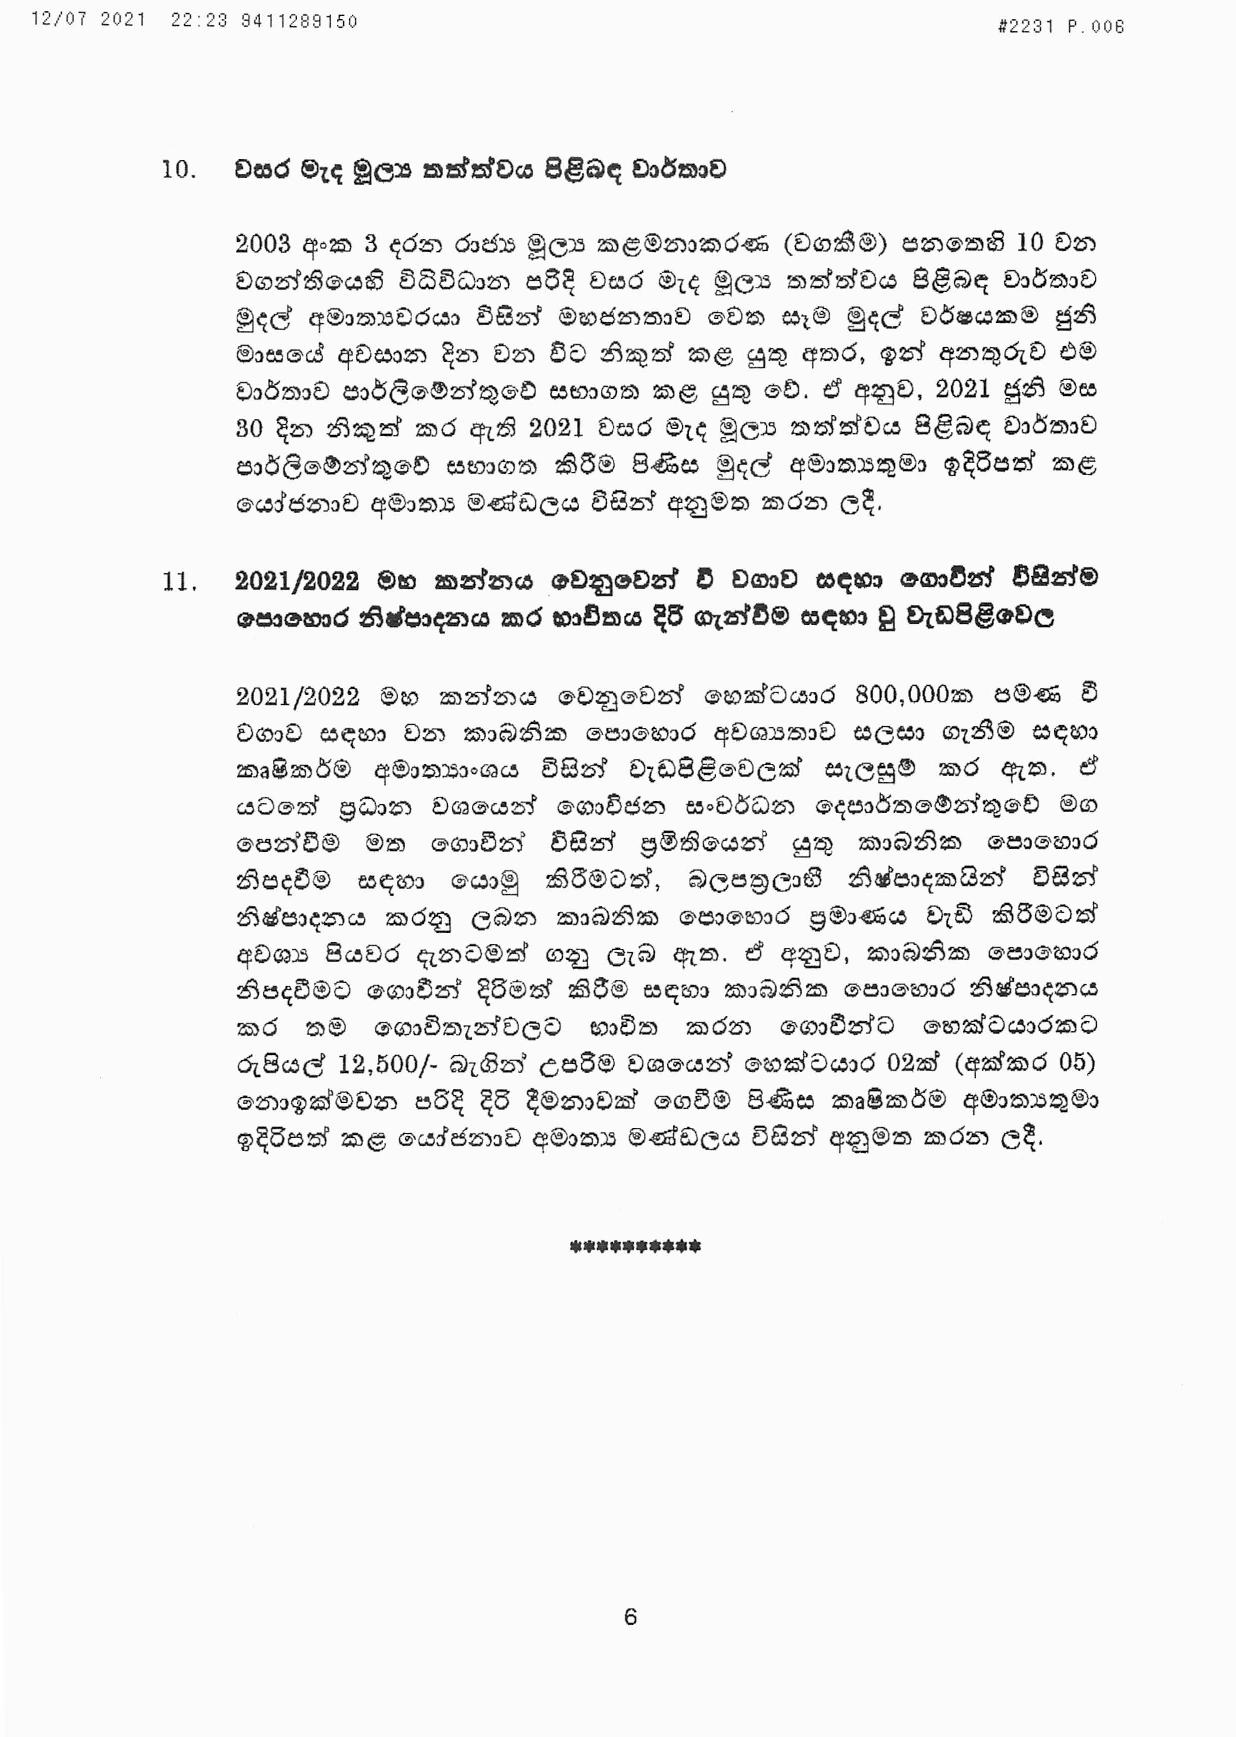 Cabinet Decision on 12.07.2021 page 006